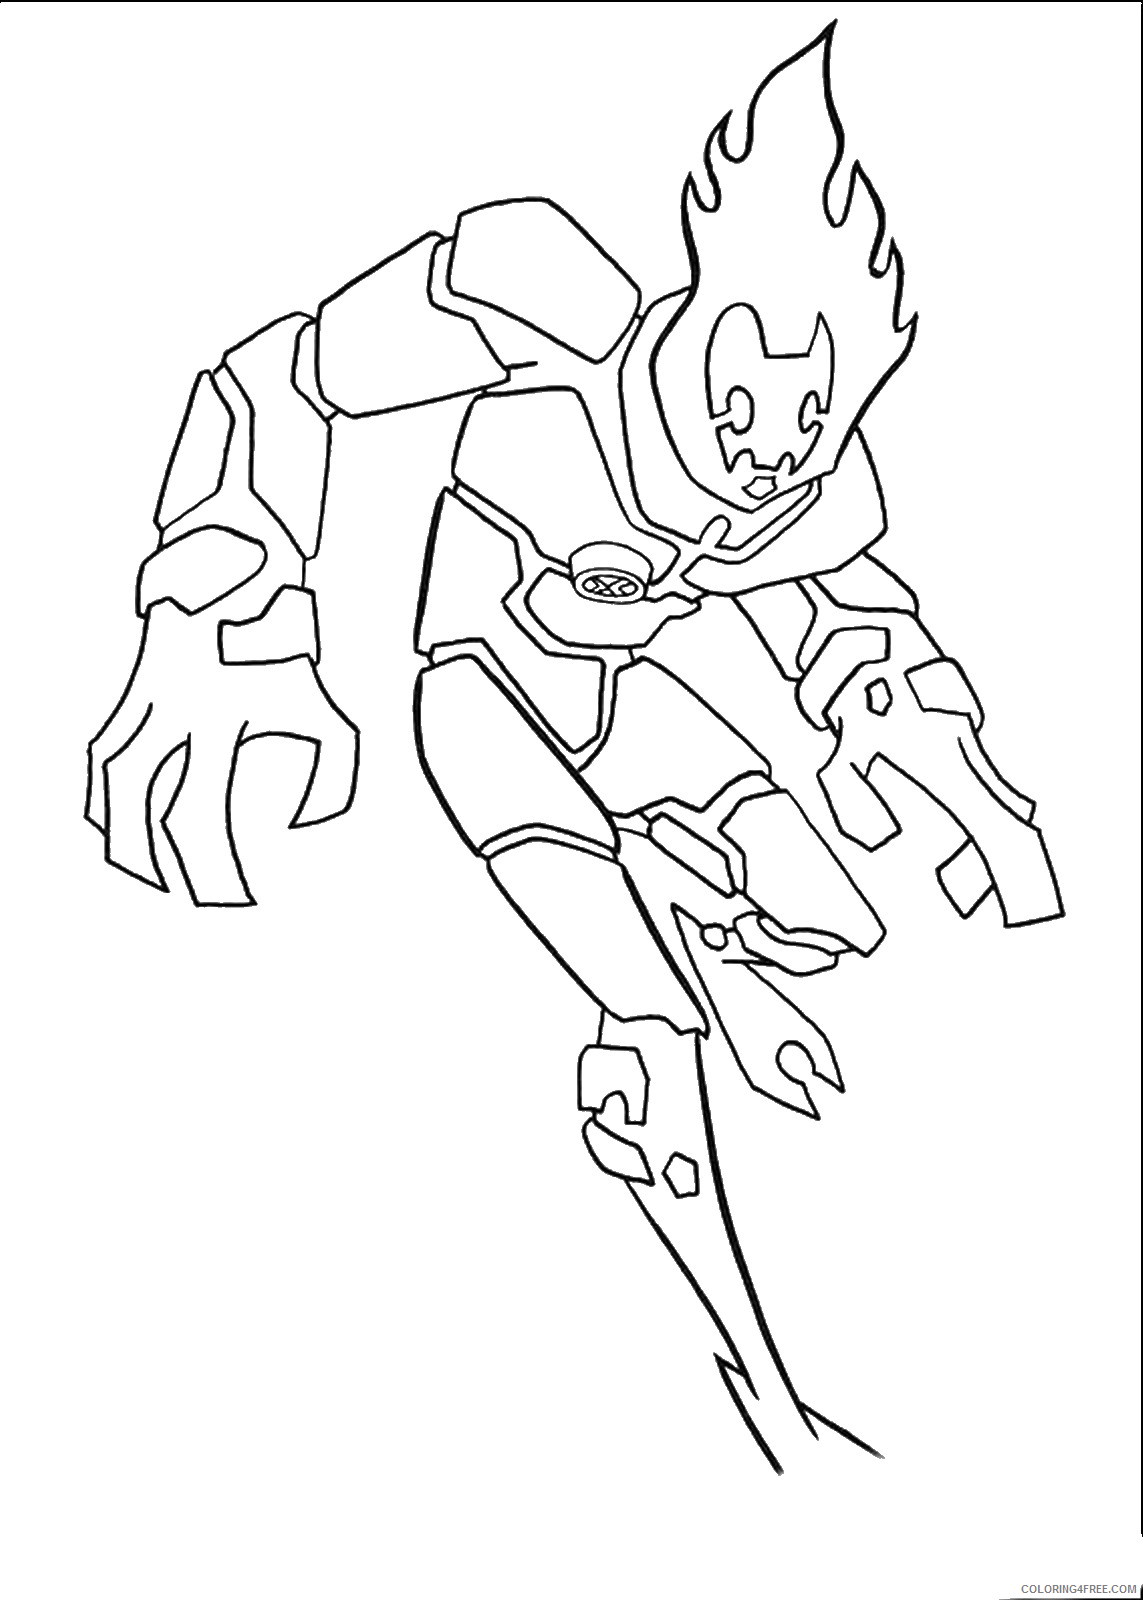 Ben 10 Coloring Pages Cartoons ben 10 26 Printable 2020 1216 Coloring4free